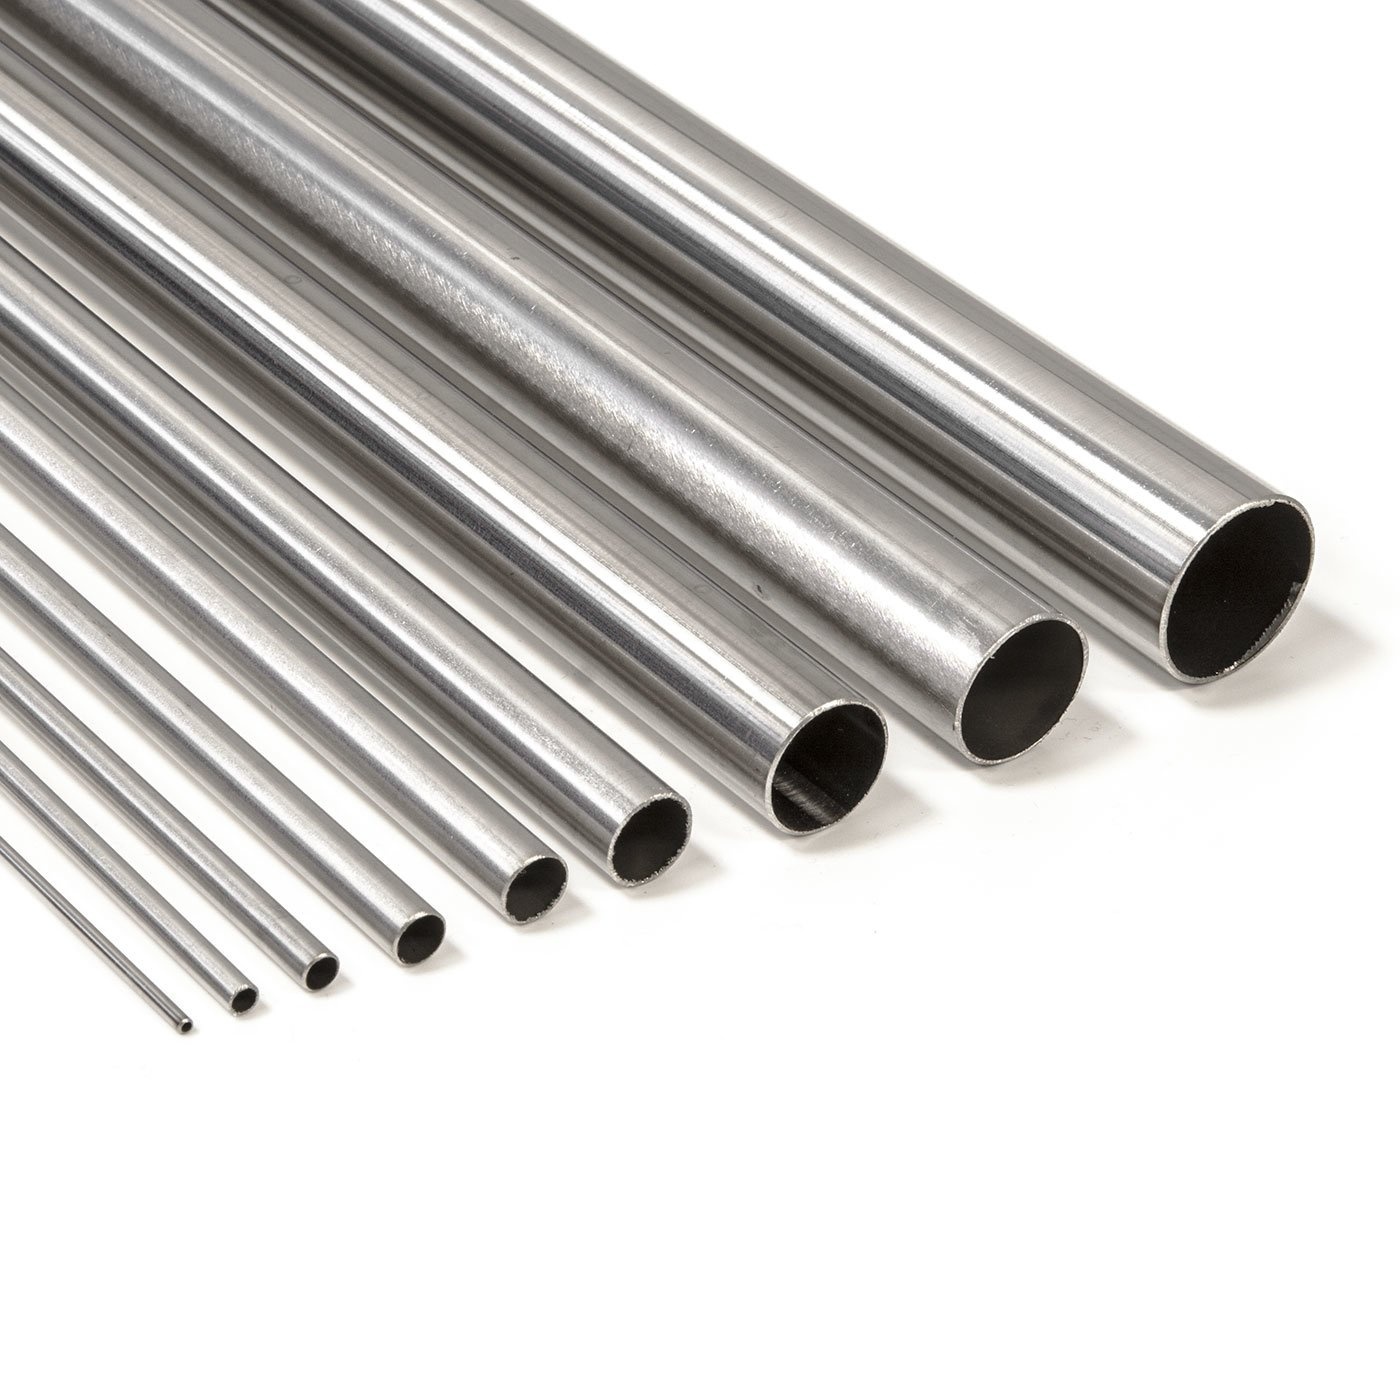 316/316L Stainless Steel Pipe/Tube Manufacturer and Supplier | Xingrong